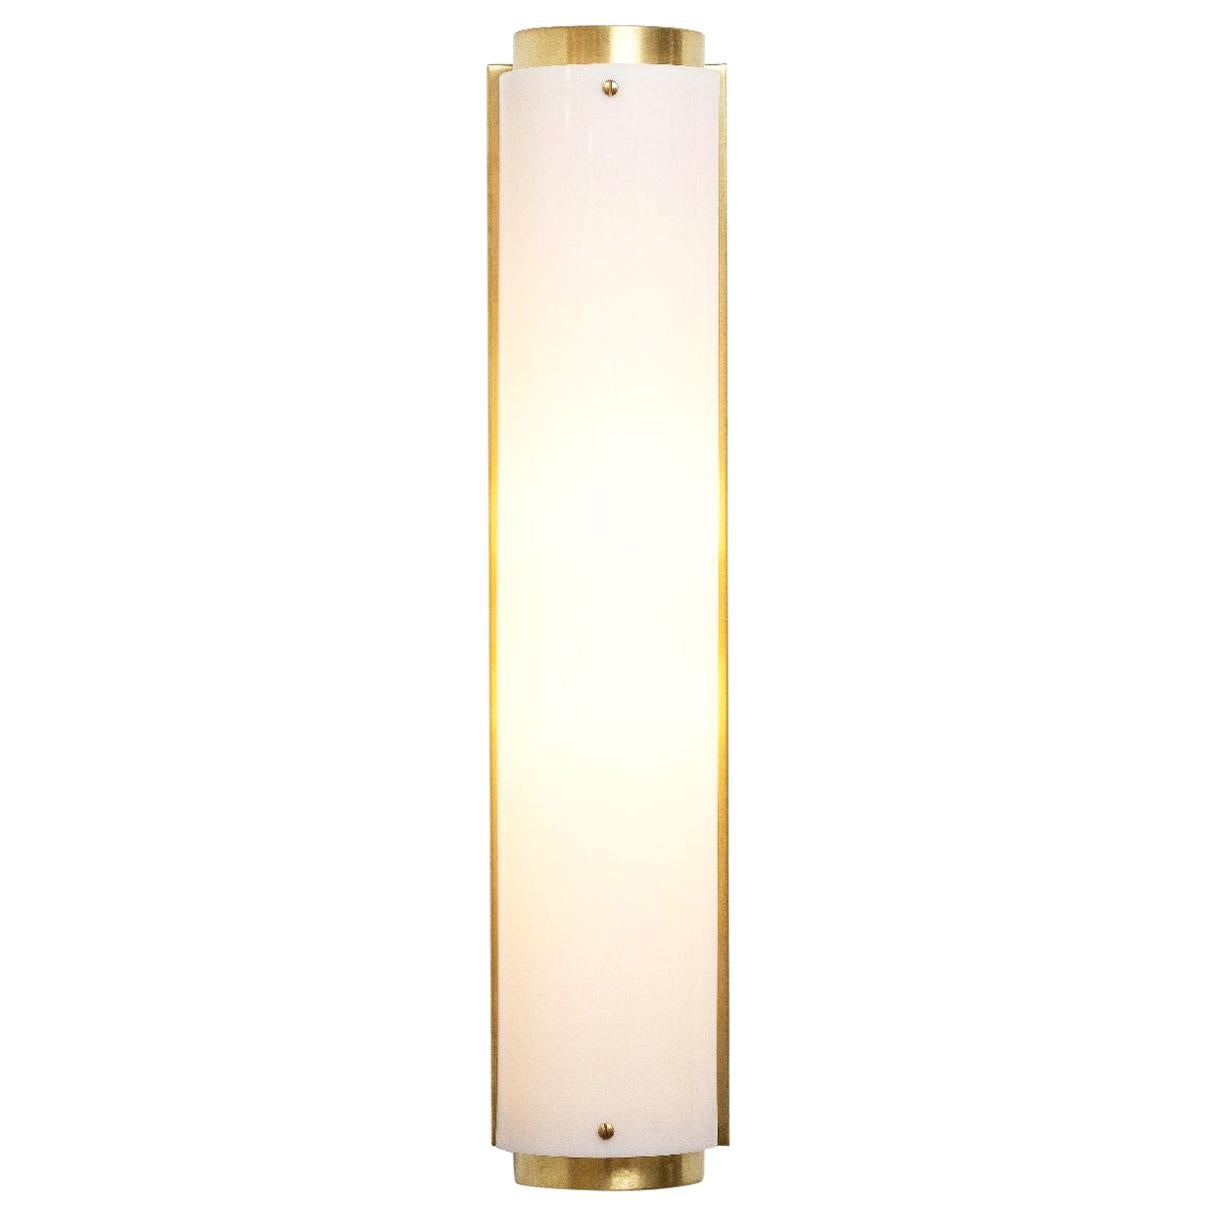 Large Arc Sconce in Black with White Lucite Shade